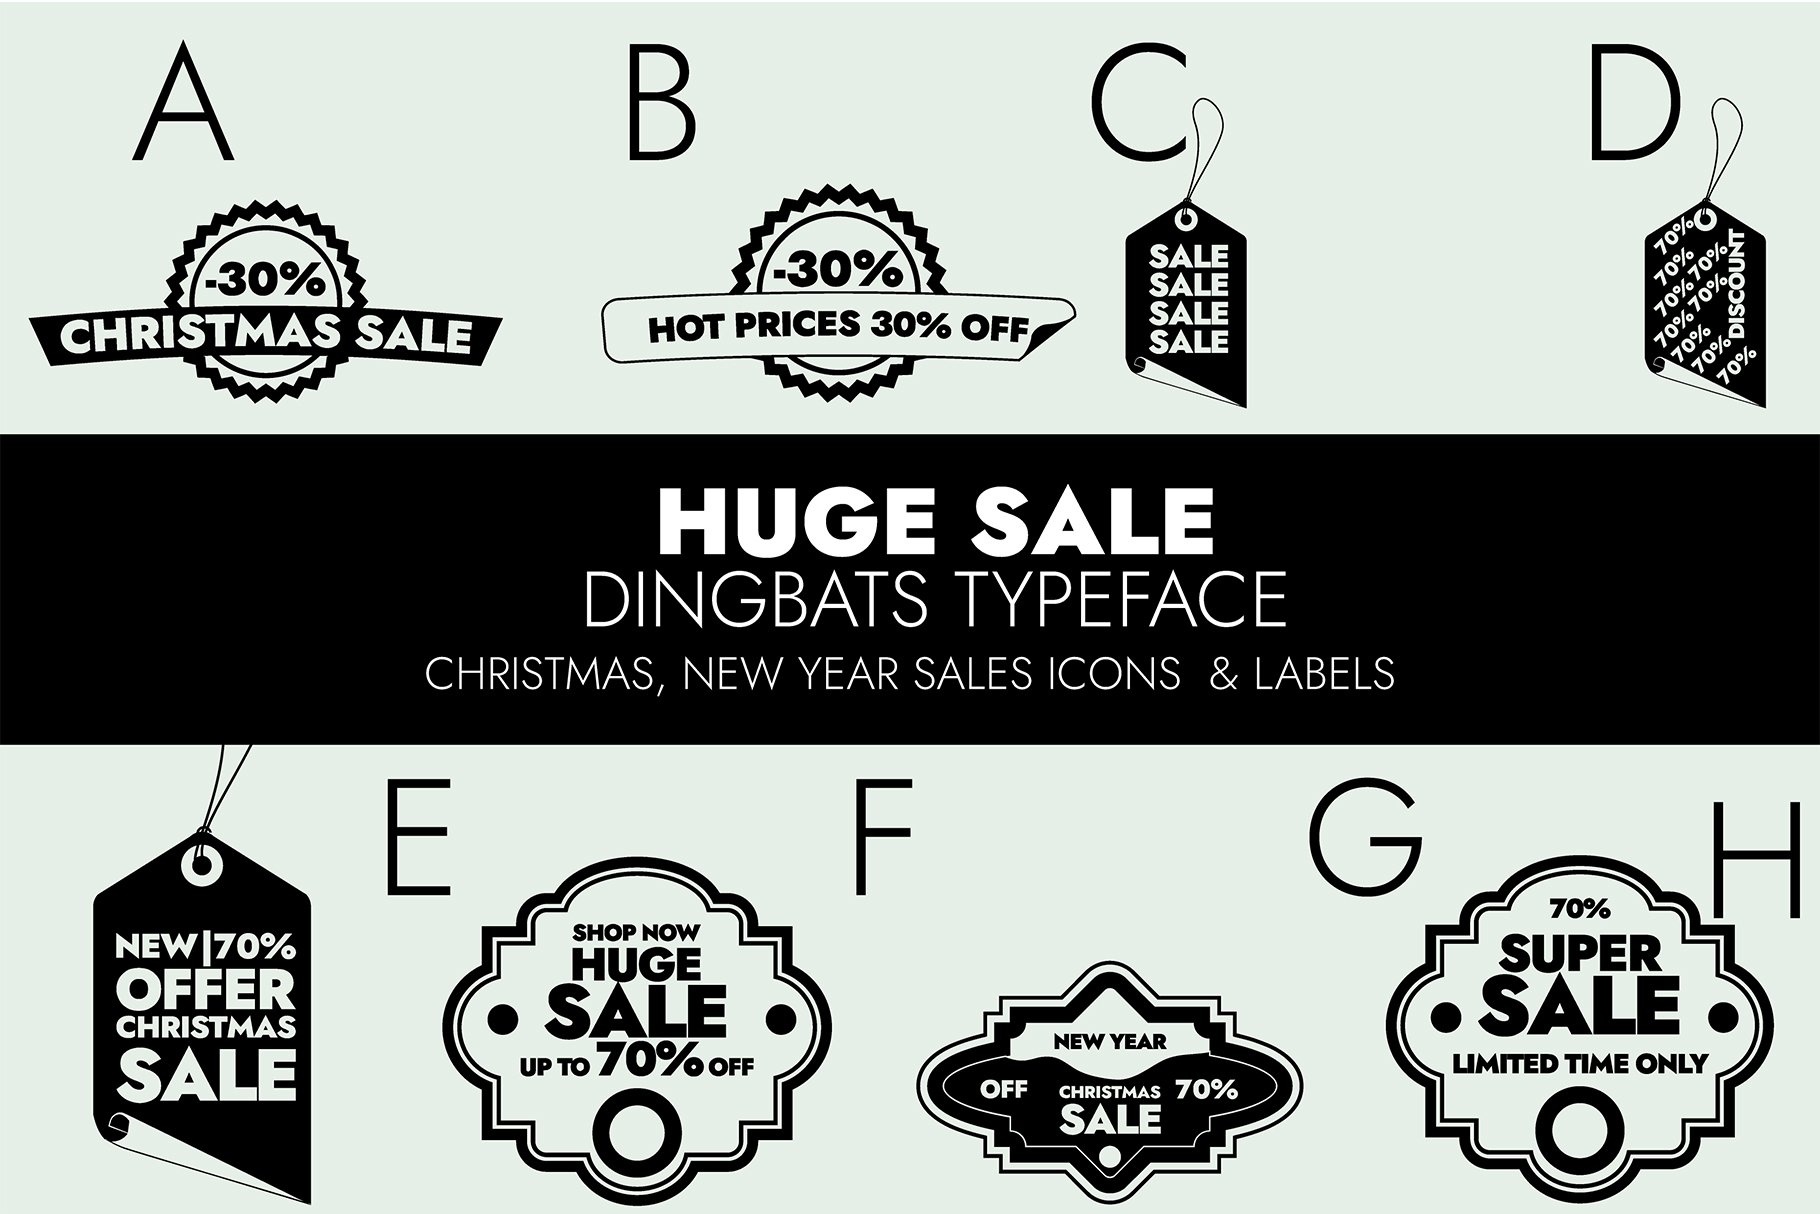 Sales Special Offers Dingbats Font cover image.